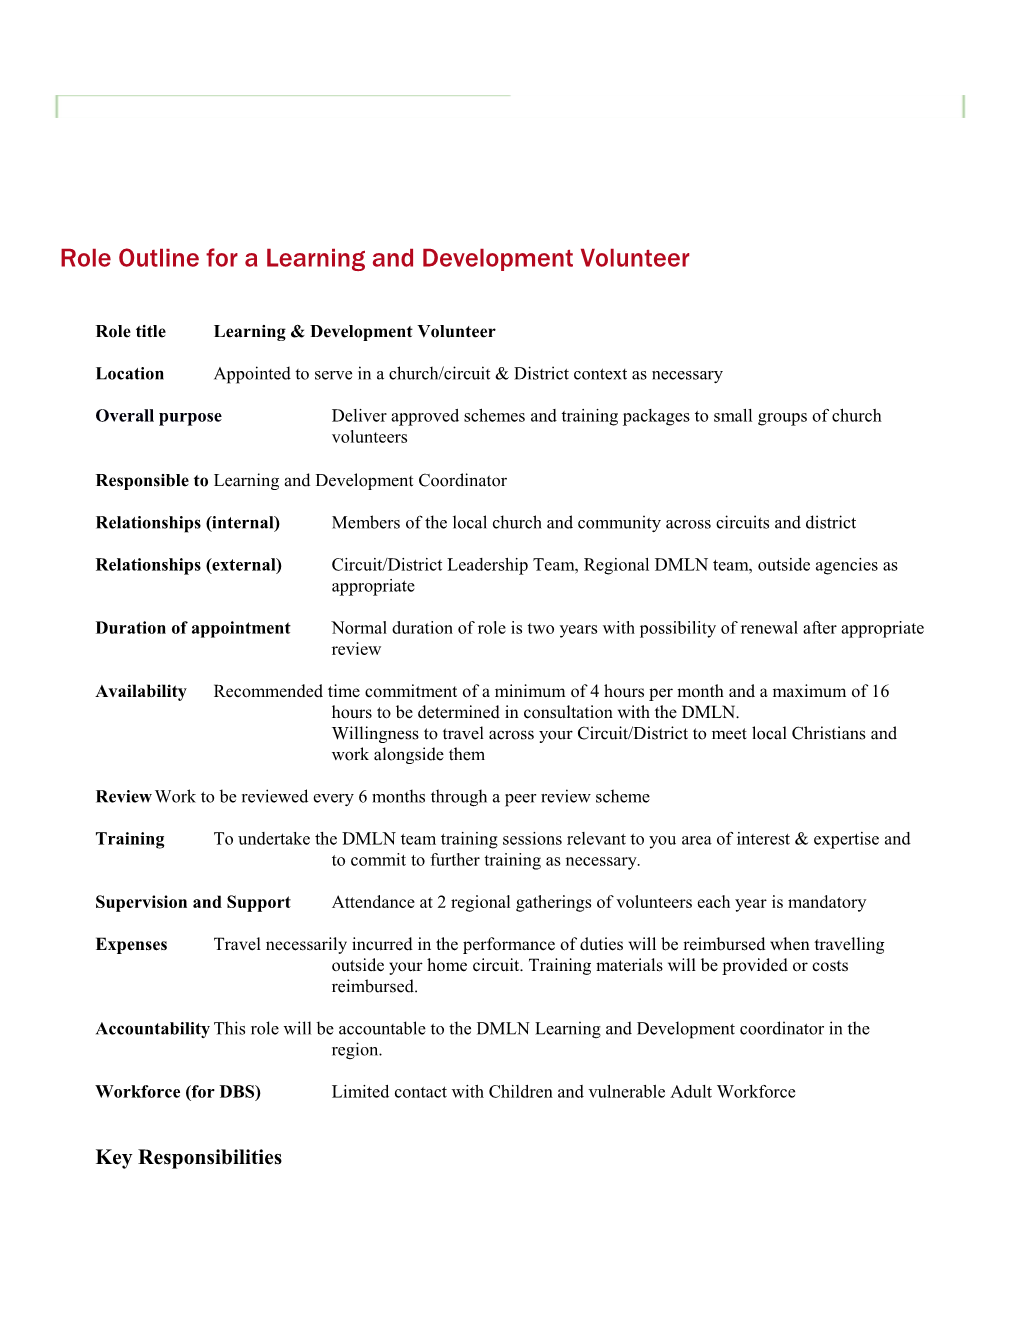 Role Outline for a Learning and Development Volunteer